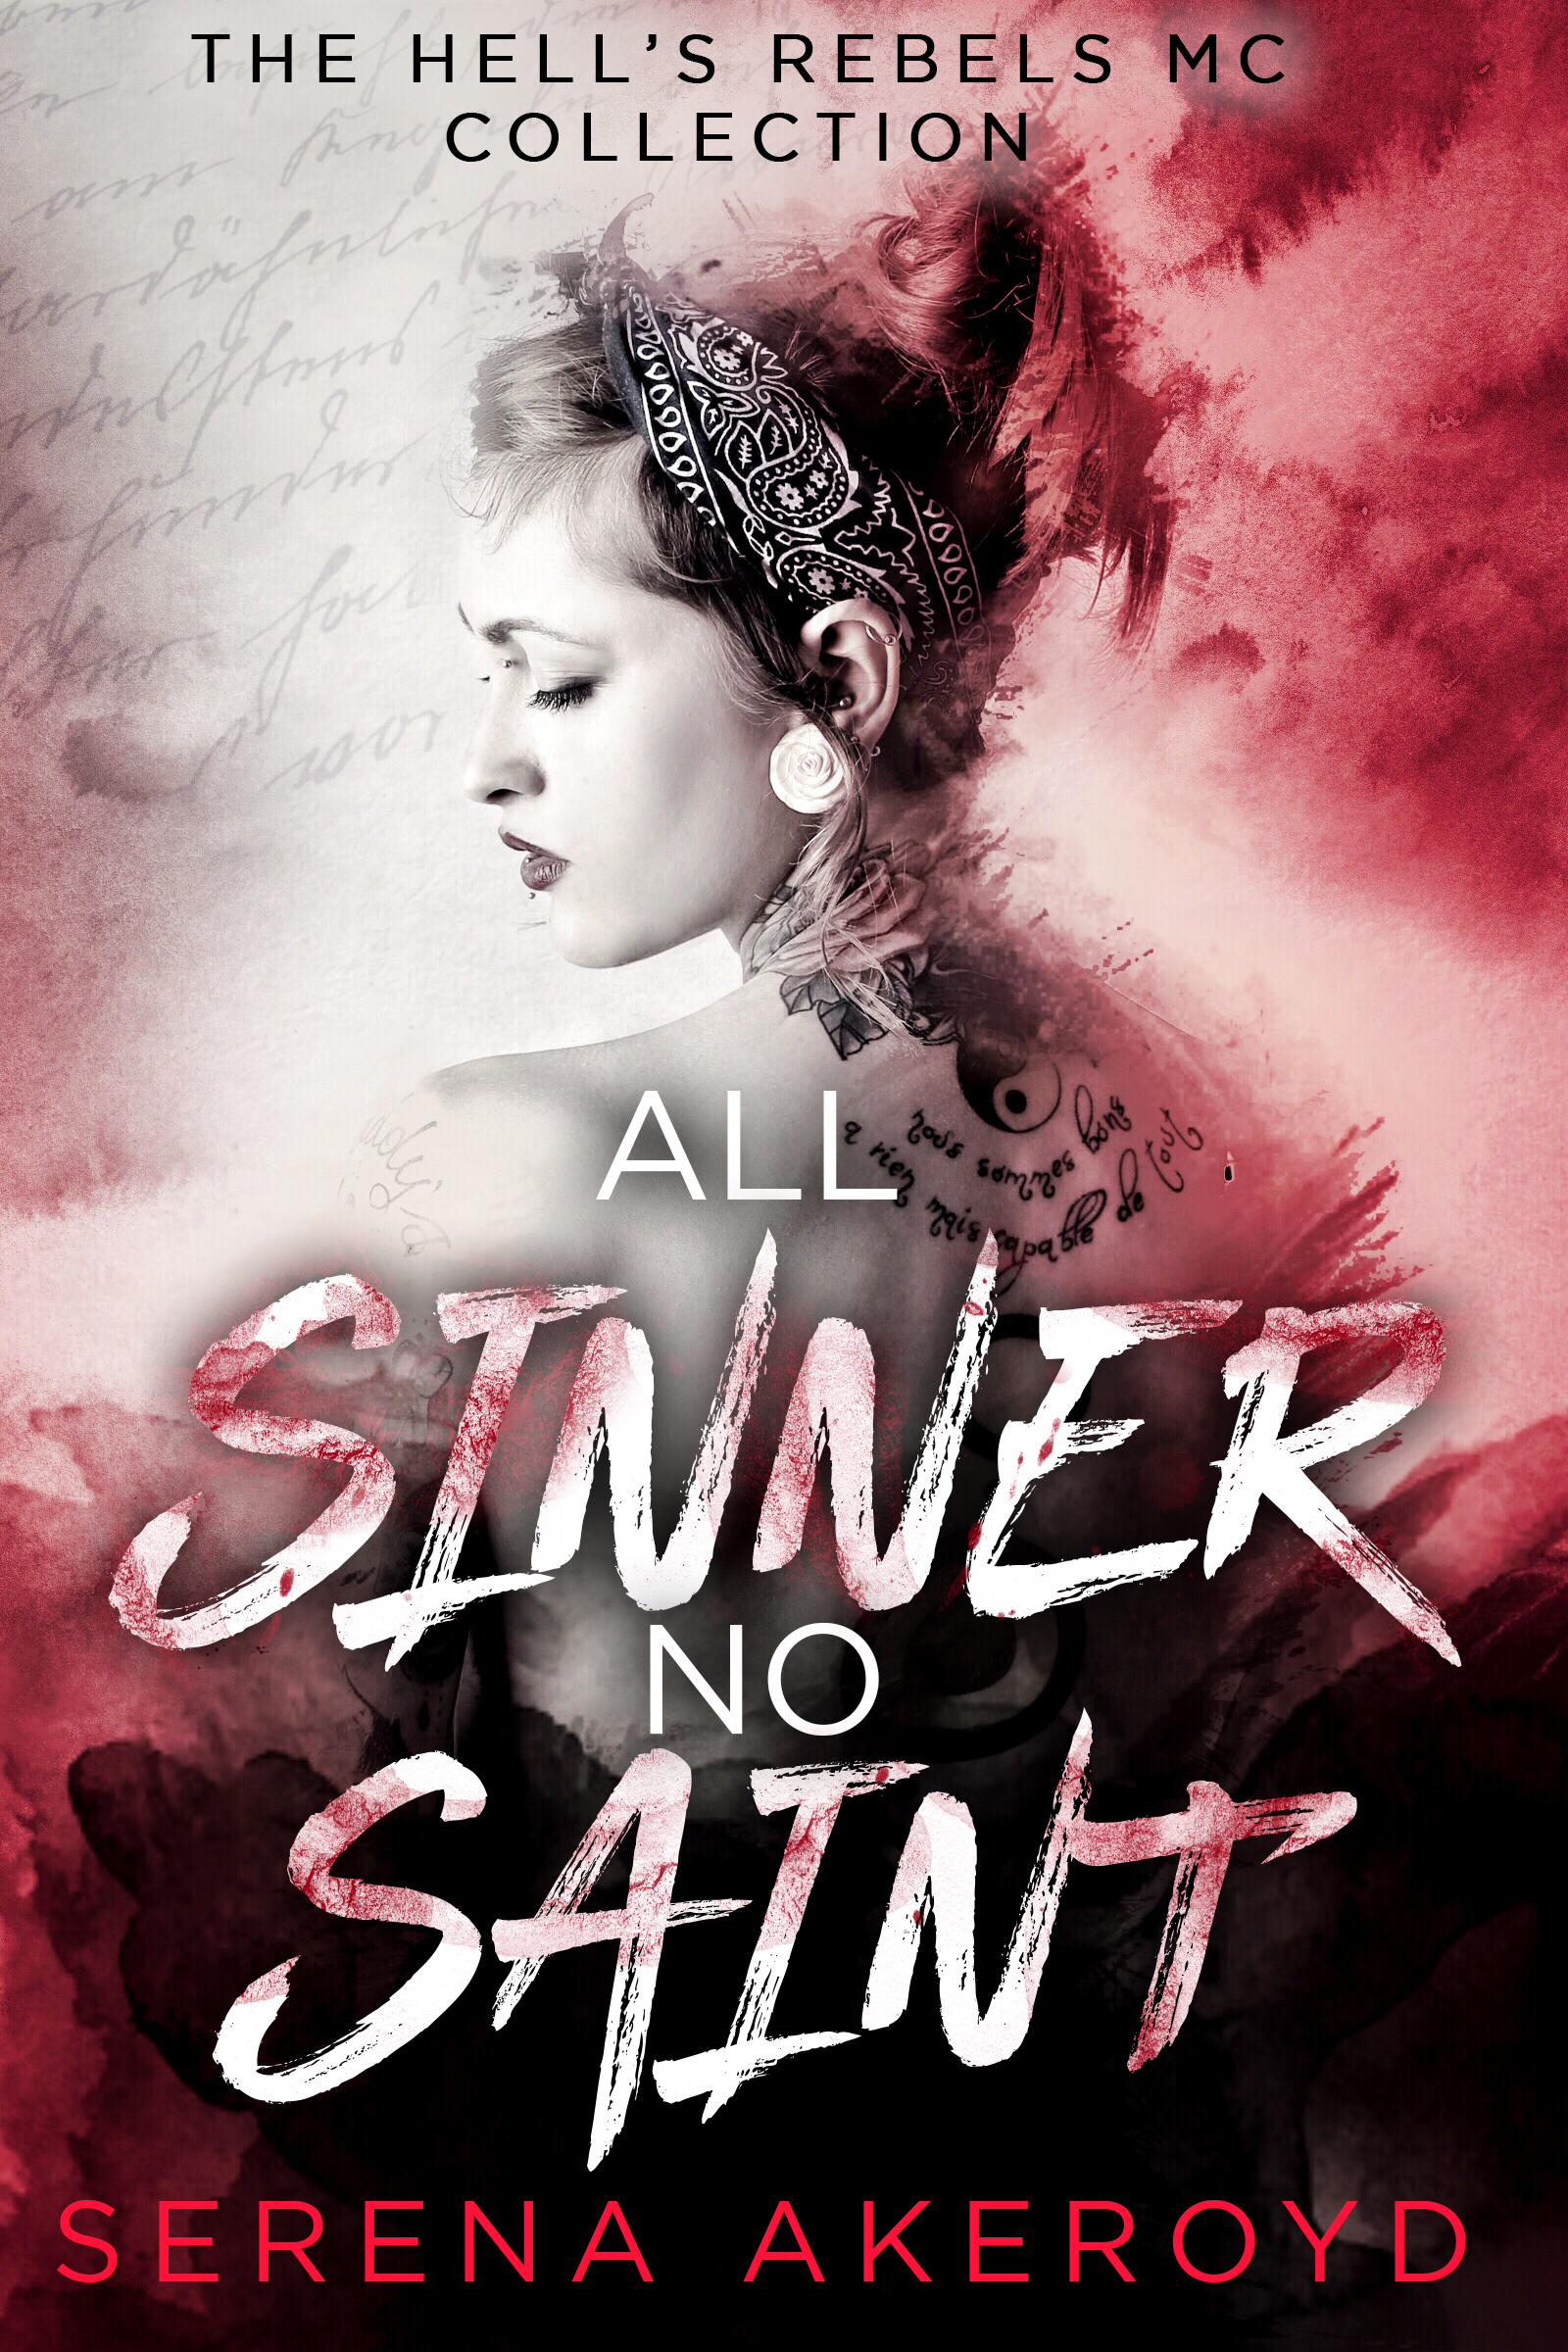 Cover for All Sinner No Saint and link to purchase